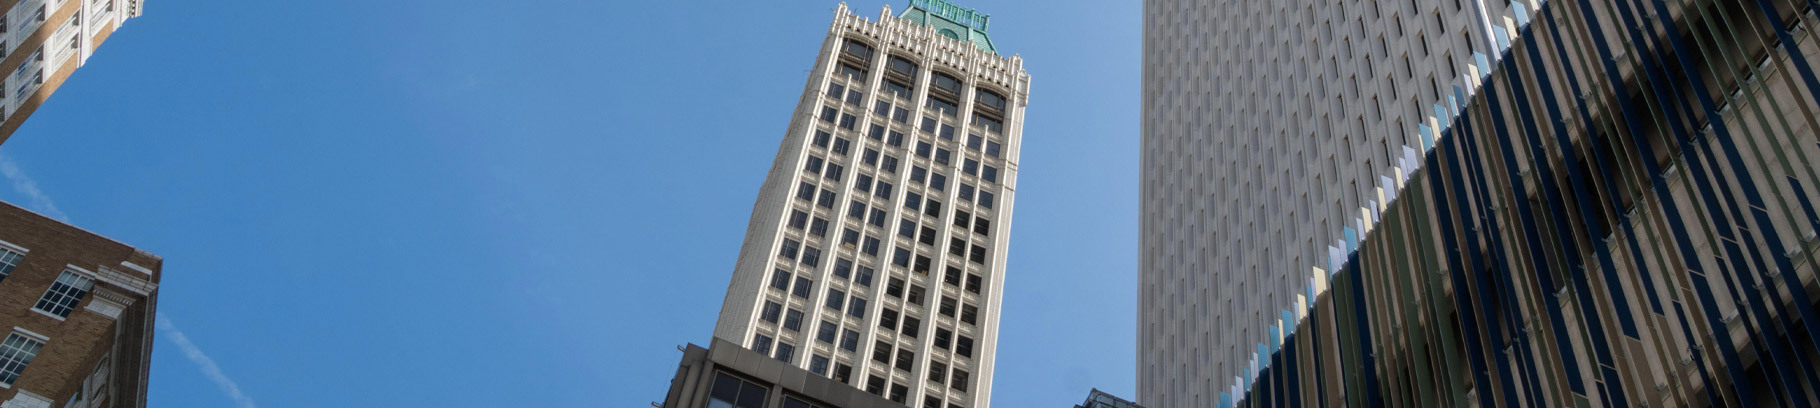 A view, looking up, to a building in downtown Tulsa during the day